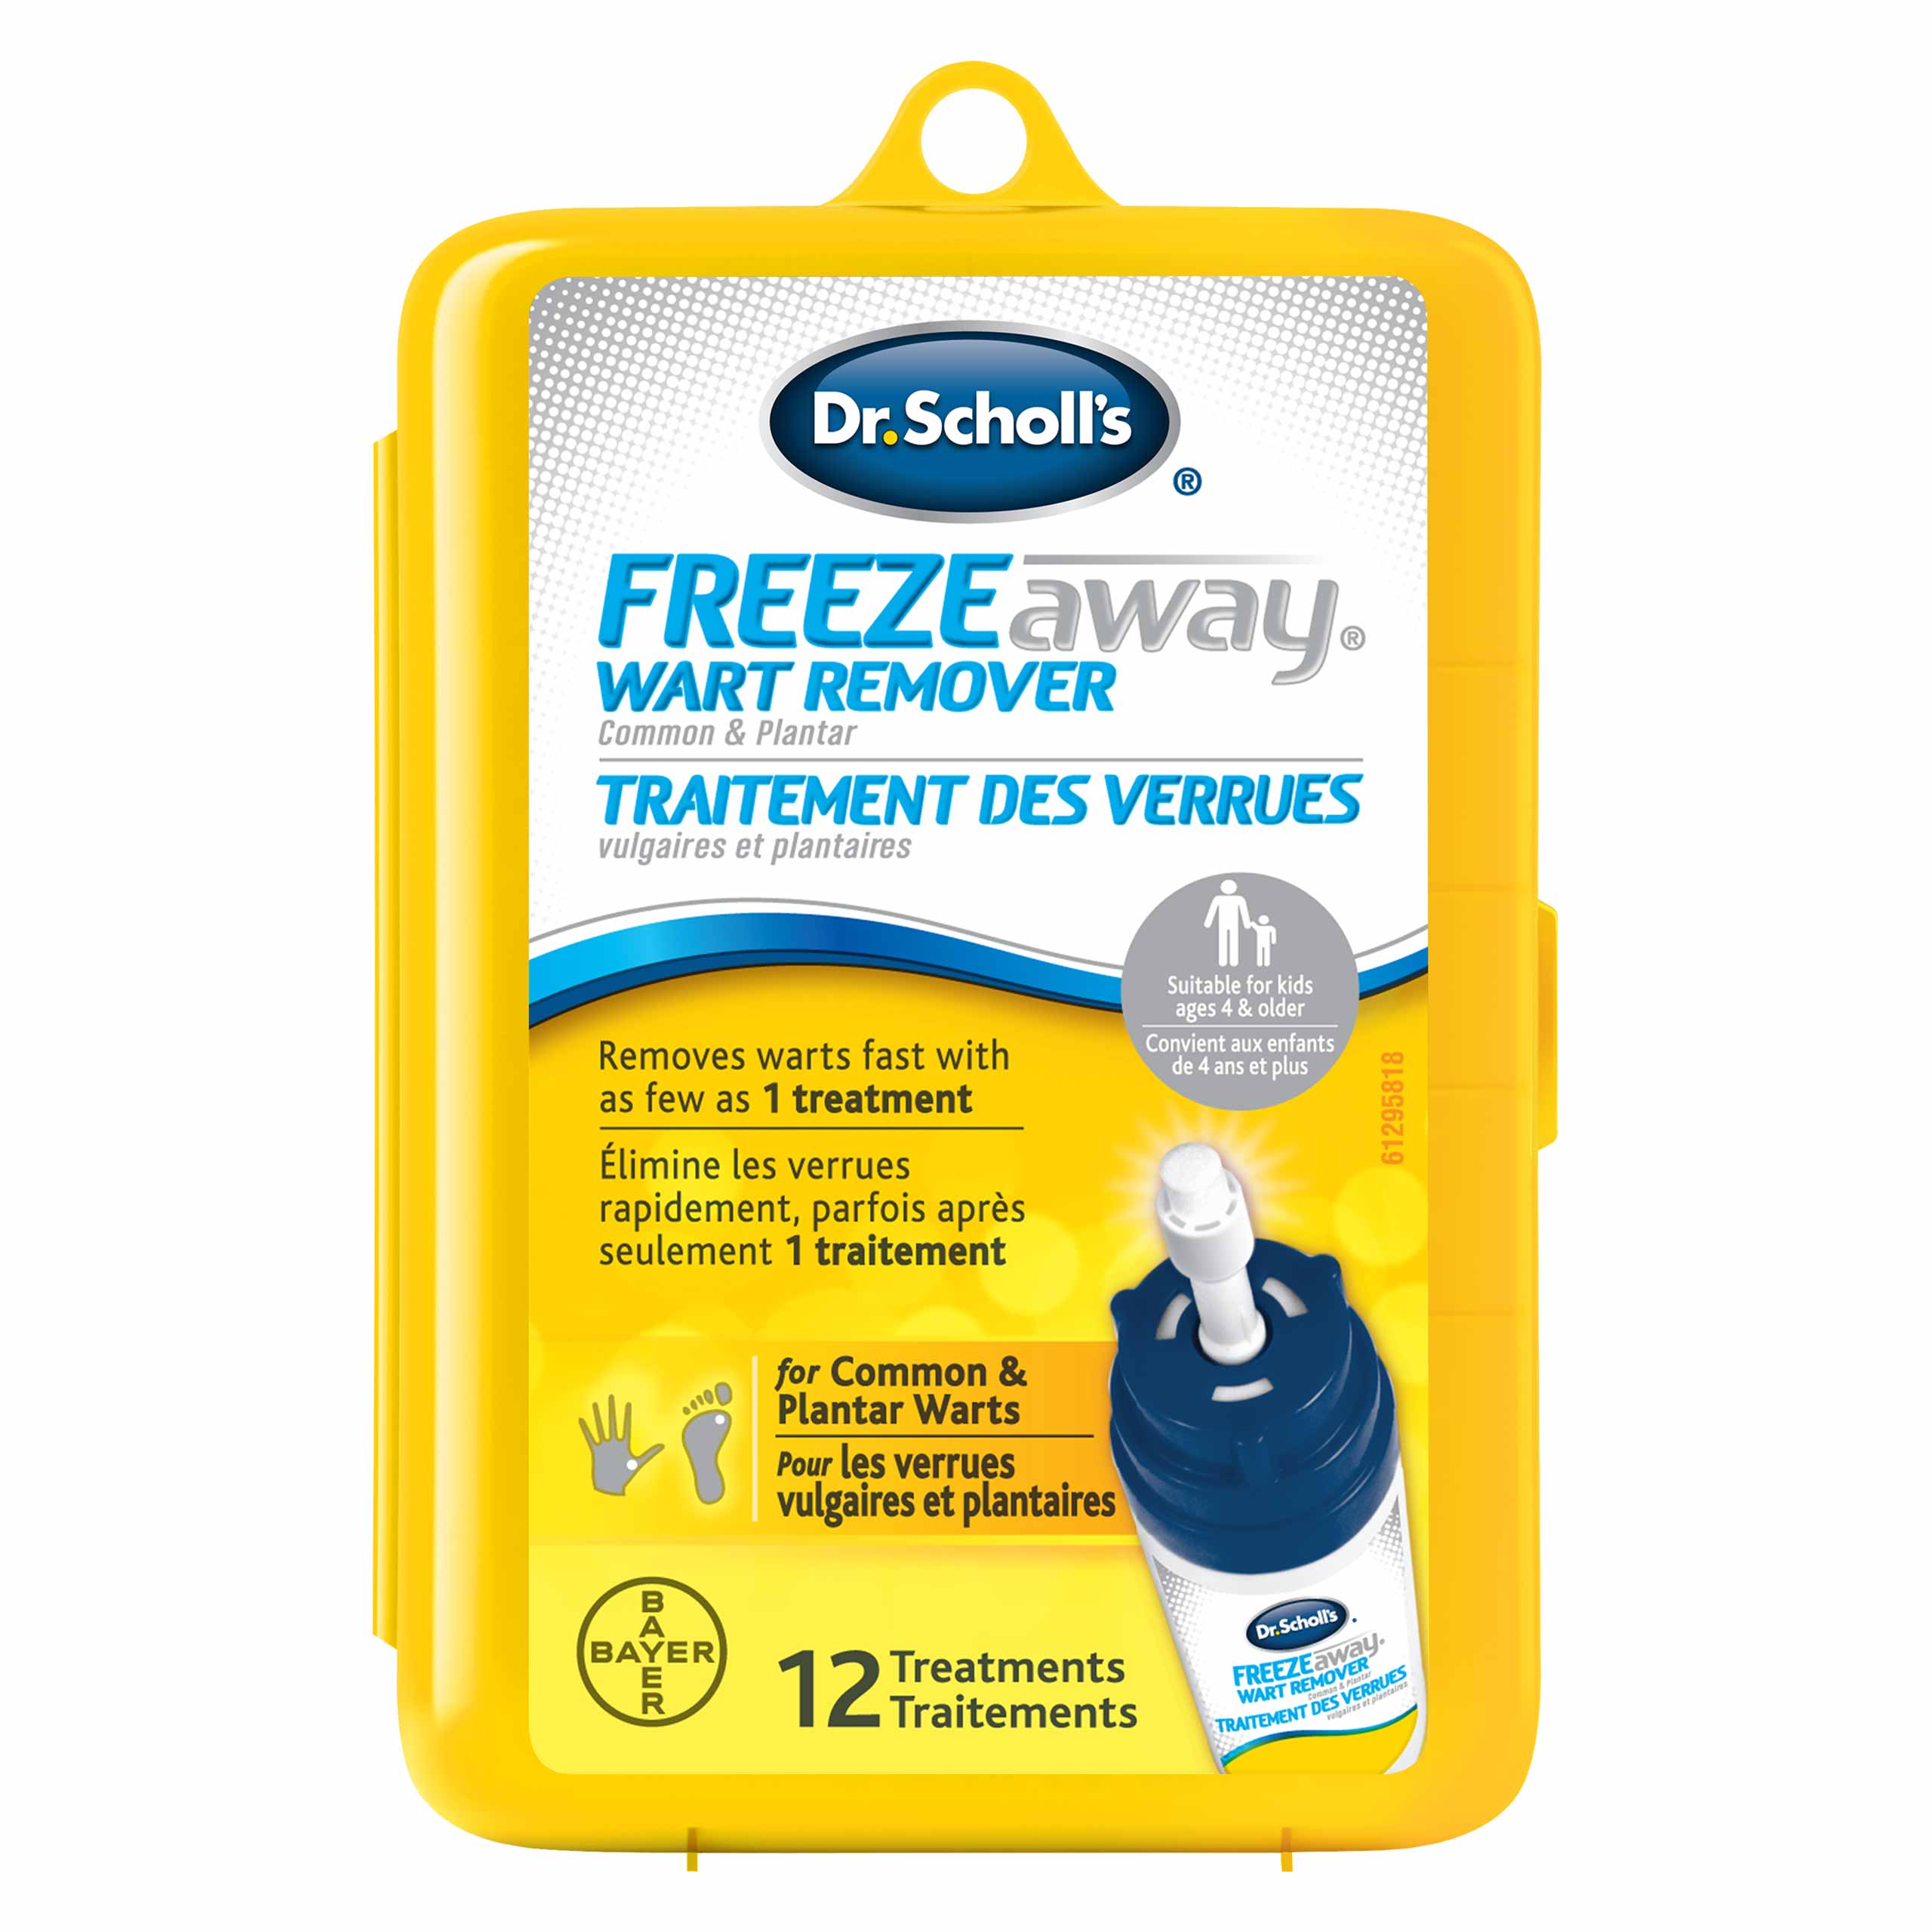 dr scholl's fast acting liquid wart remover